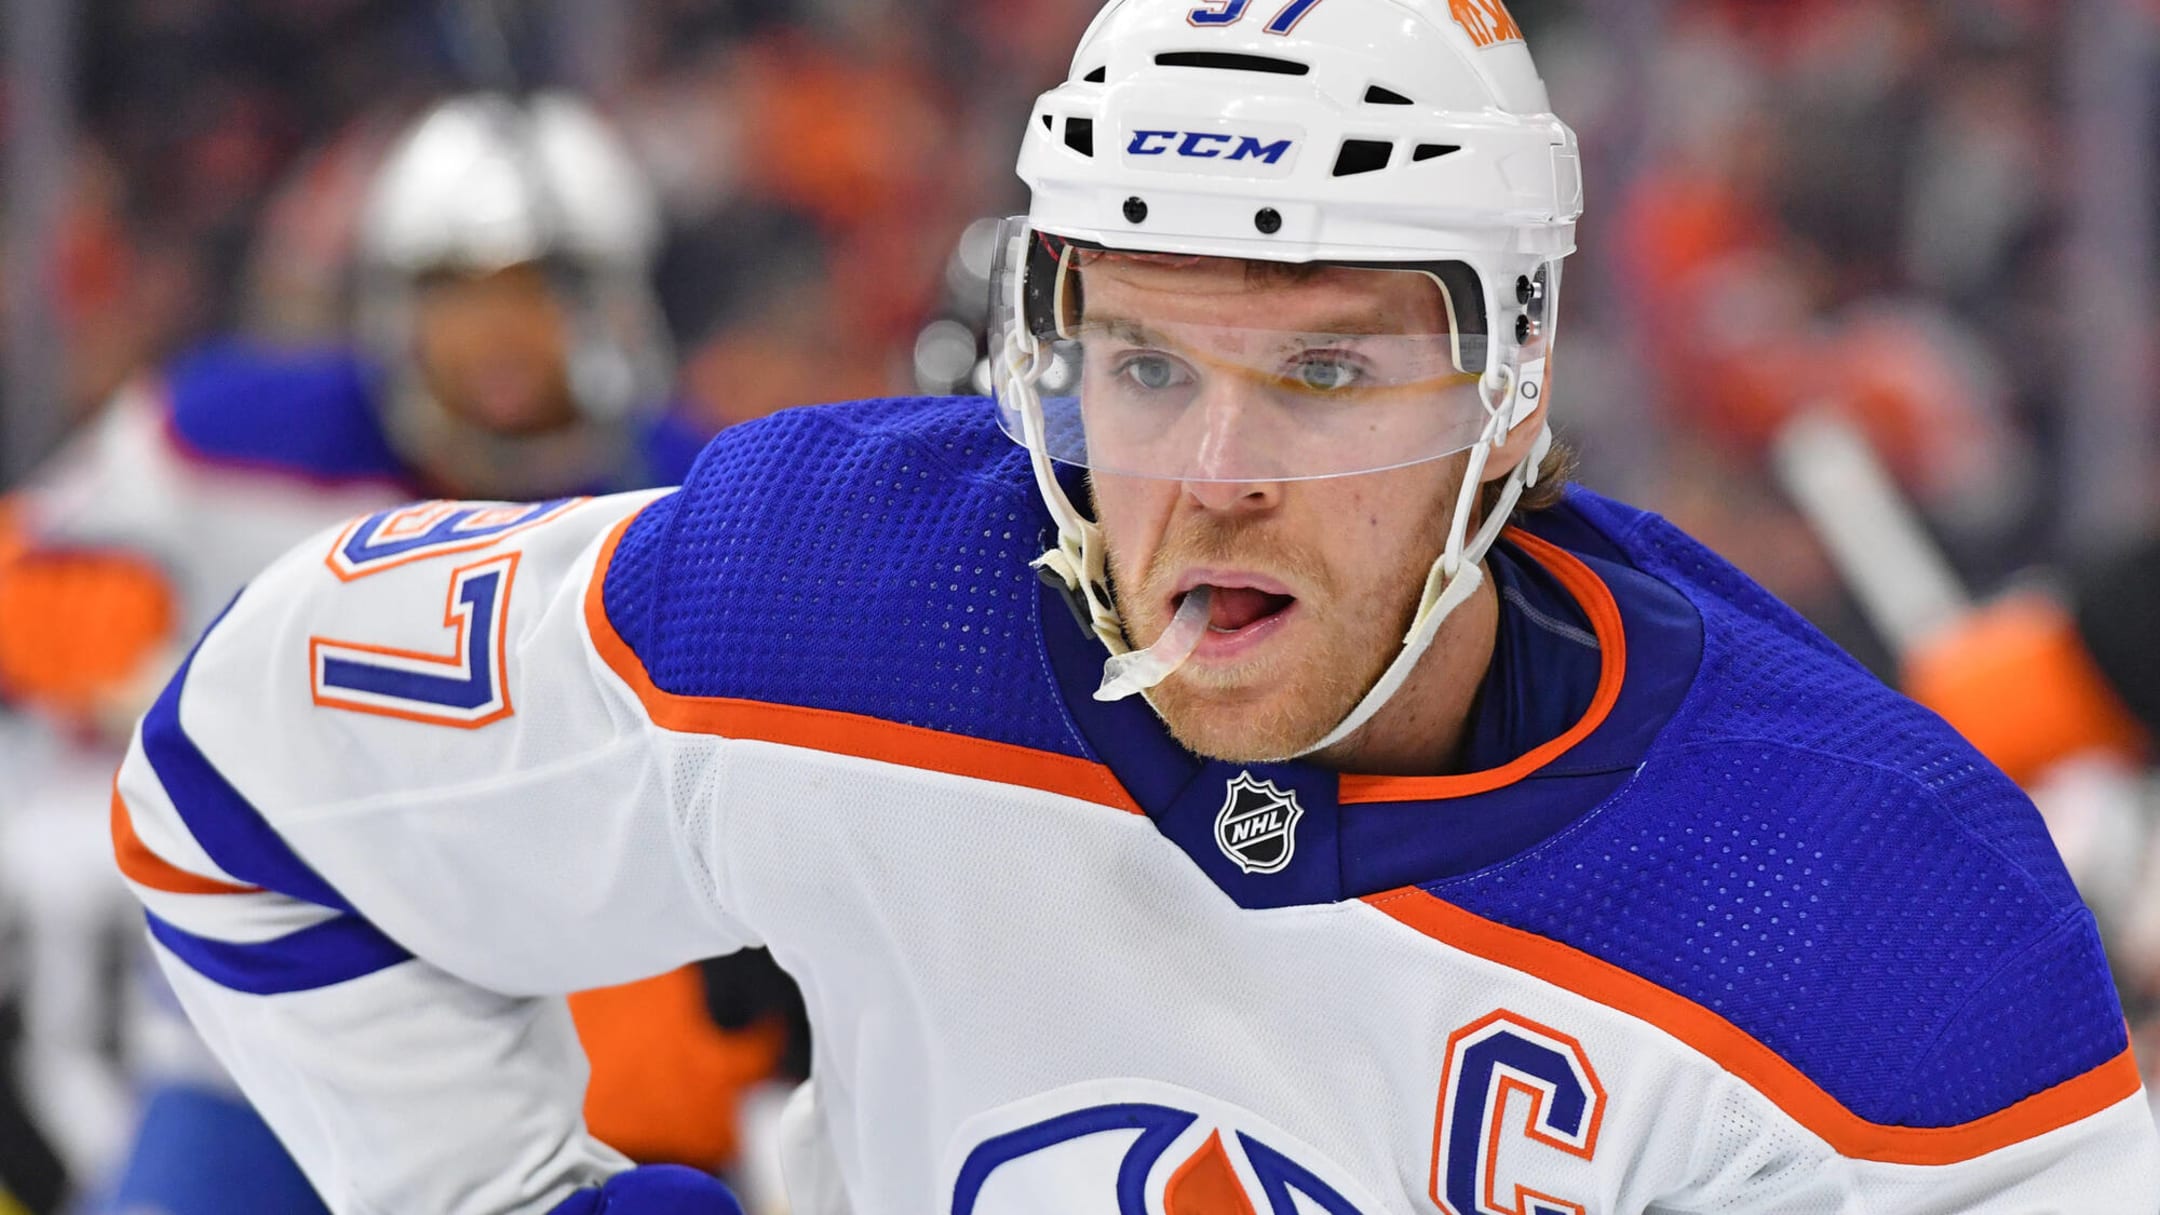 Jets vs. Oilers Player Props Betting Odds